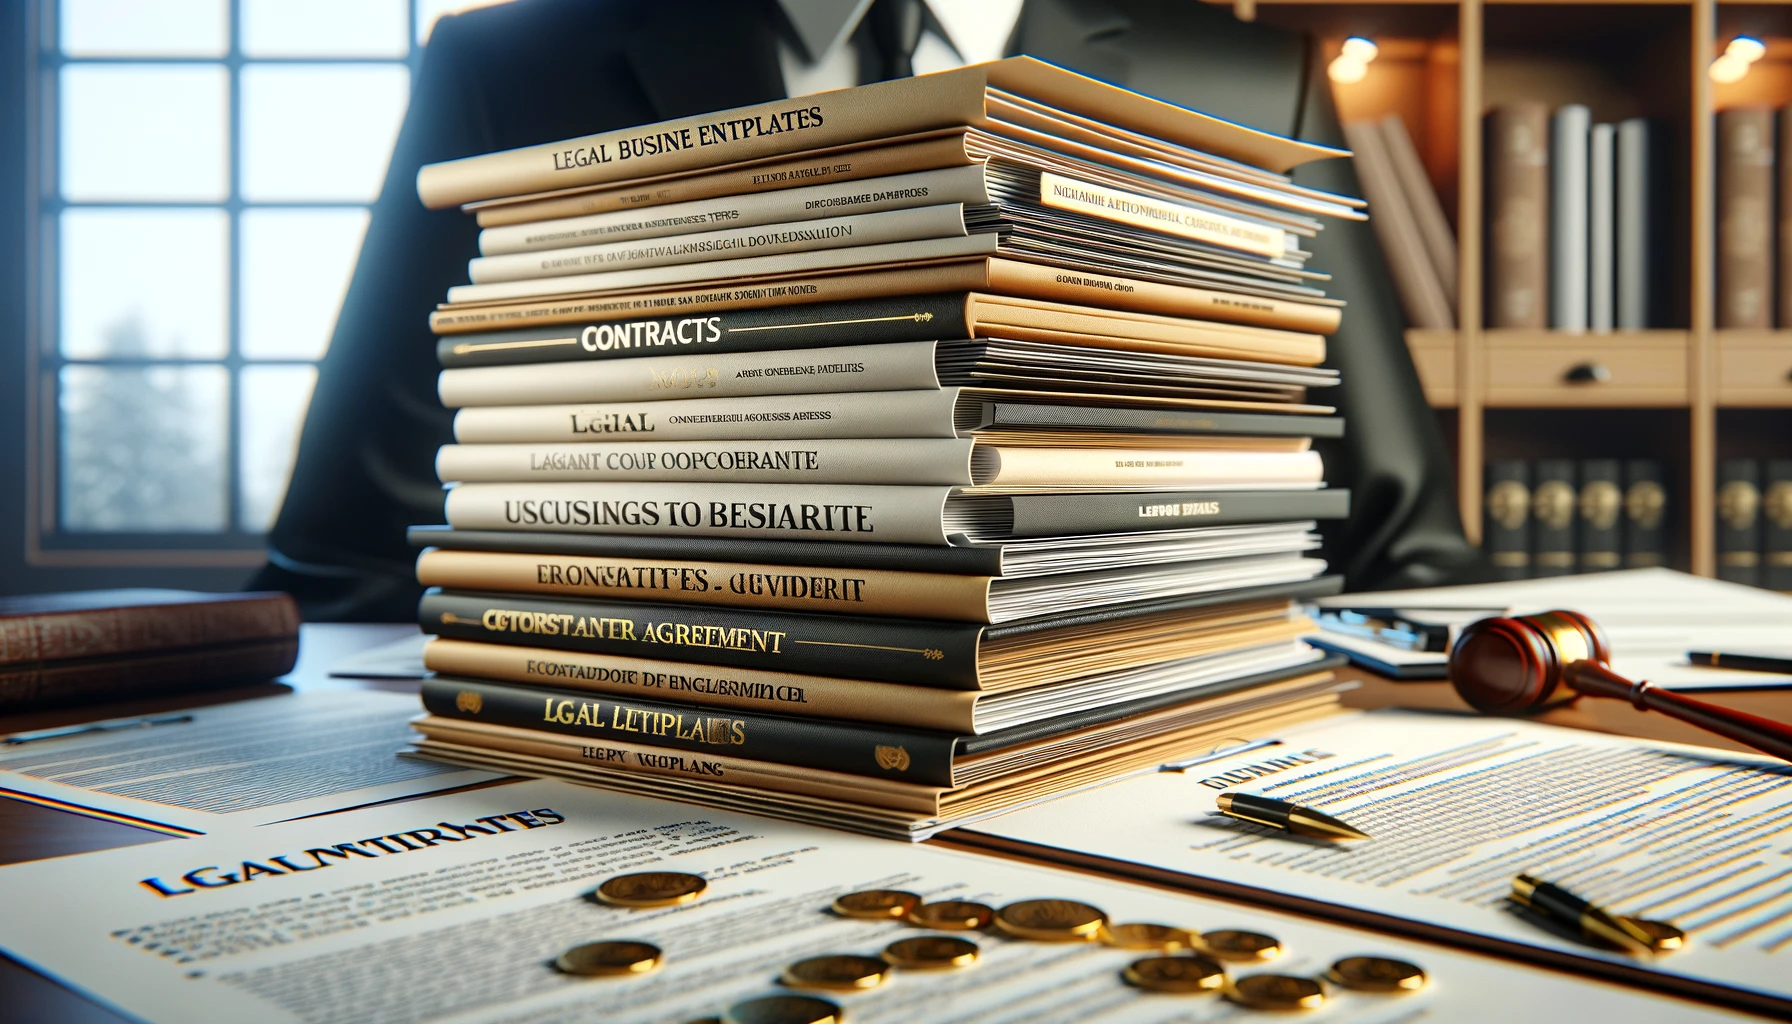 Neatly arranged stack of diverse legal templates for businesses on a desk, symbolizing readiness and order.